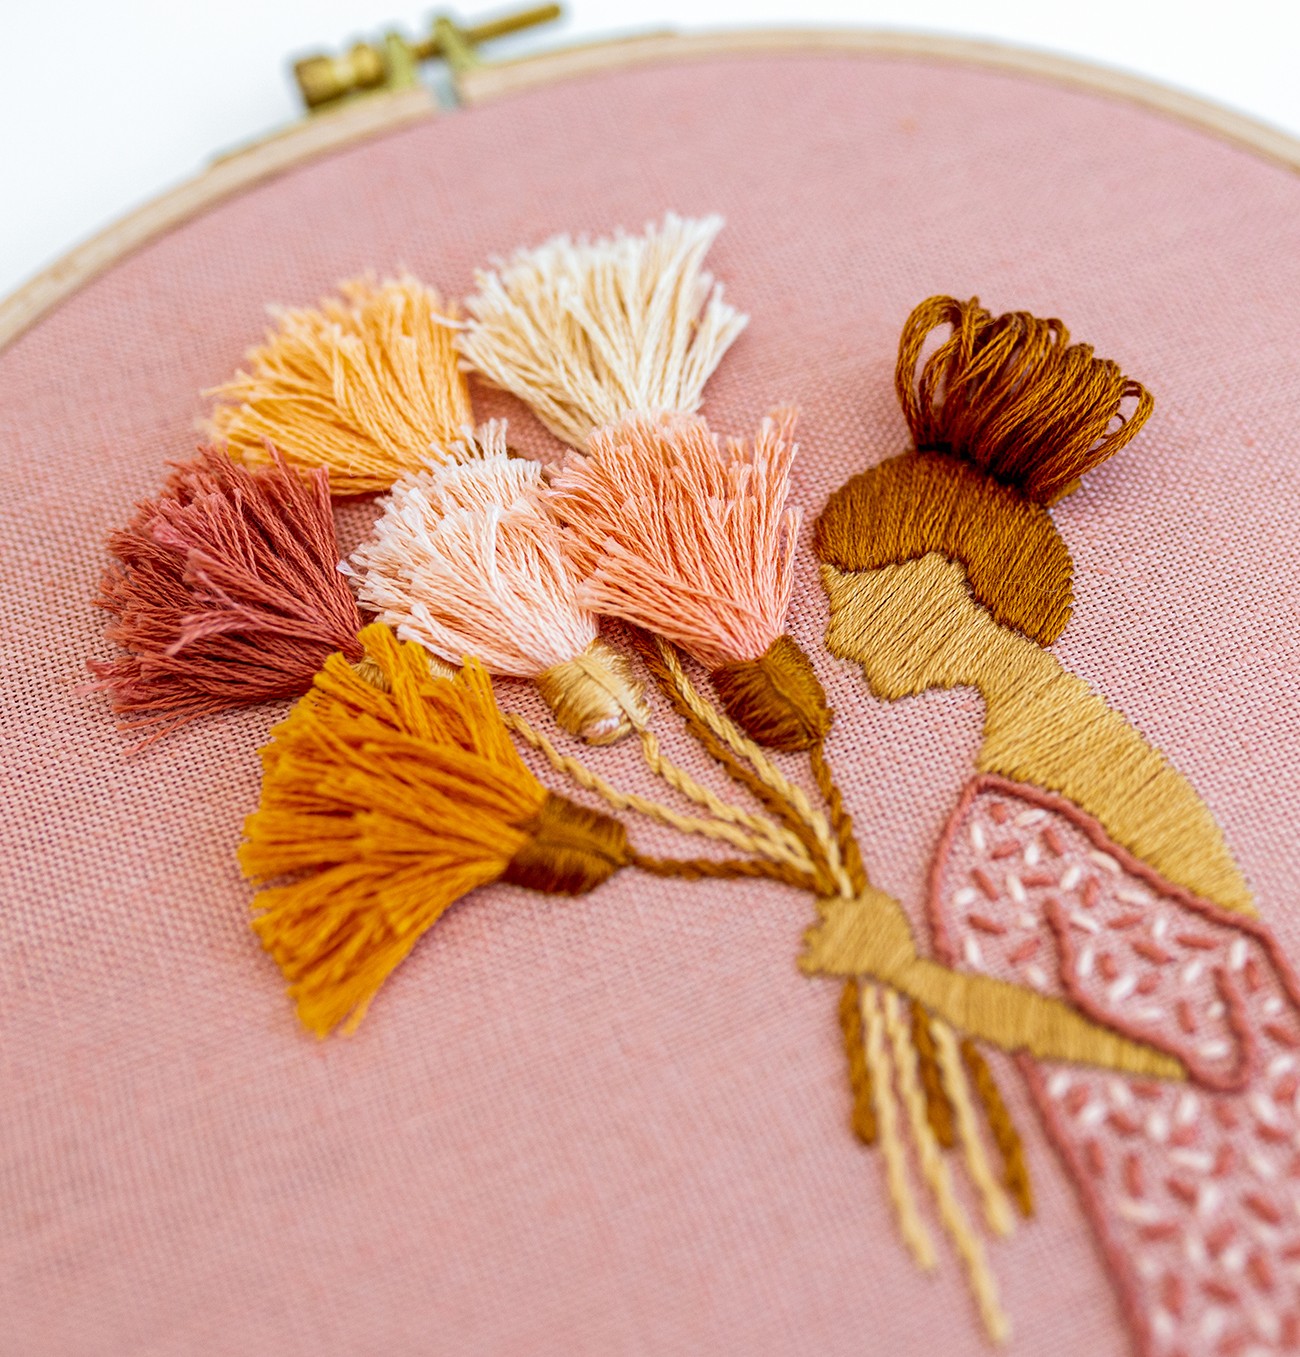 A satin stitch tunnel makes up the hair of The Florist pattern.